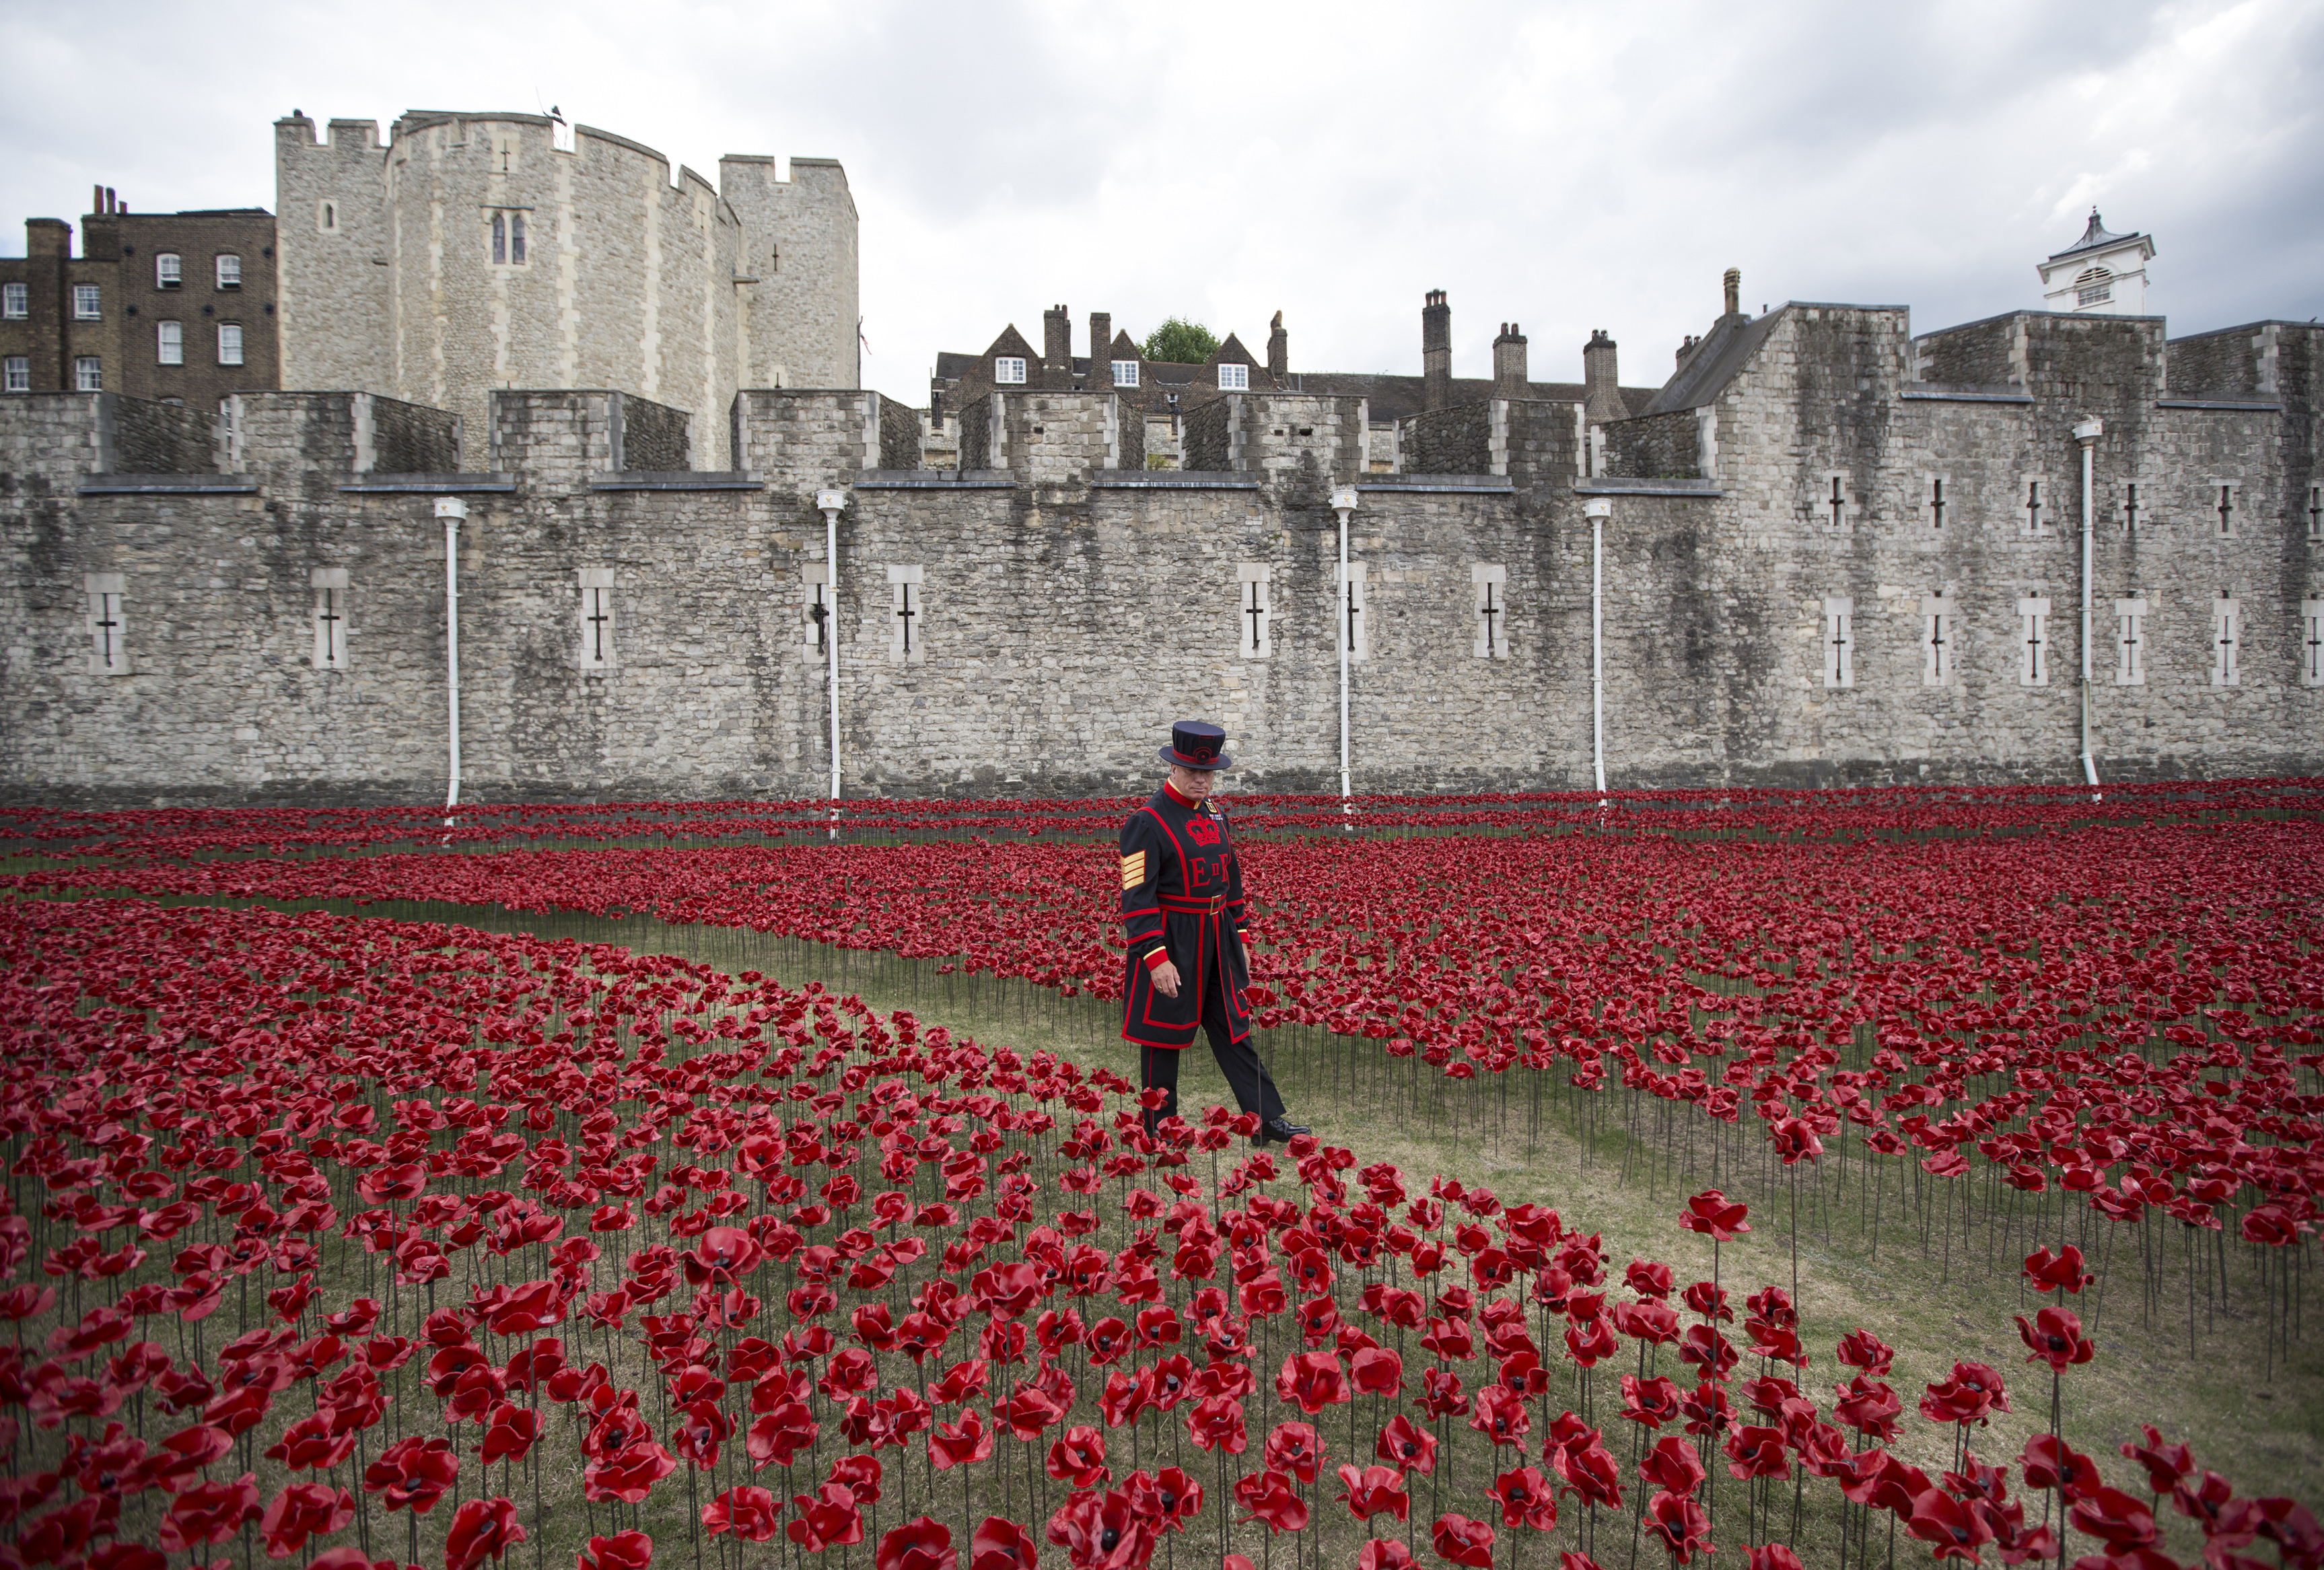 Blood Swept Lands and Seas of Red at Tower of London